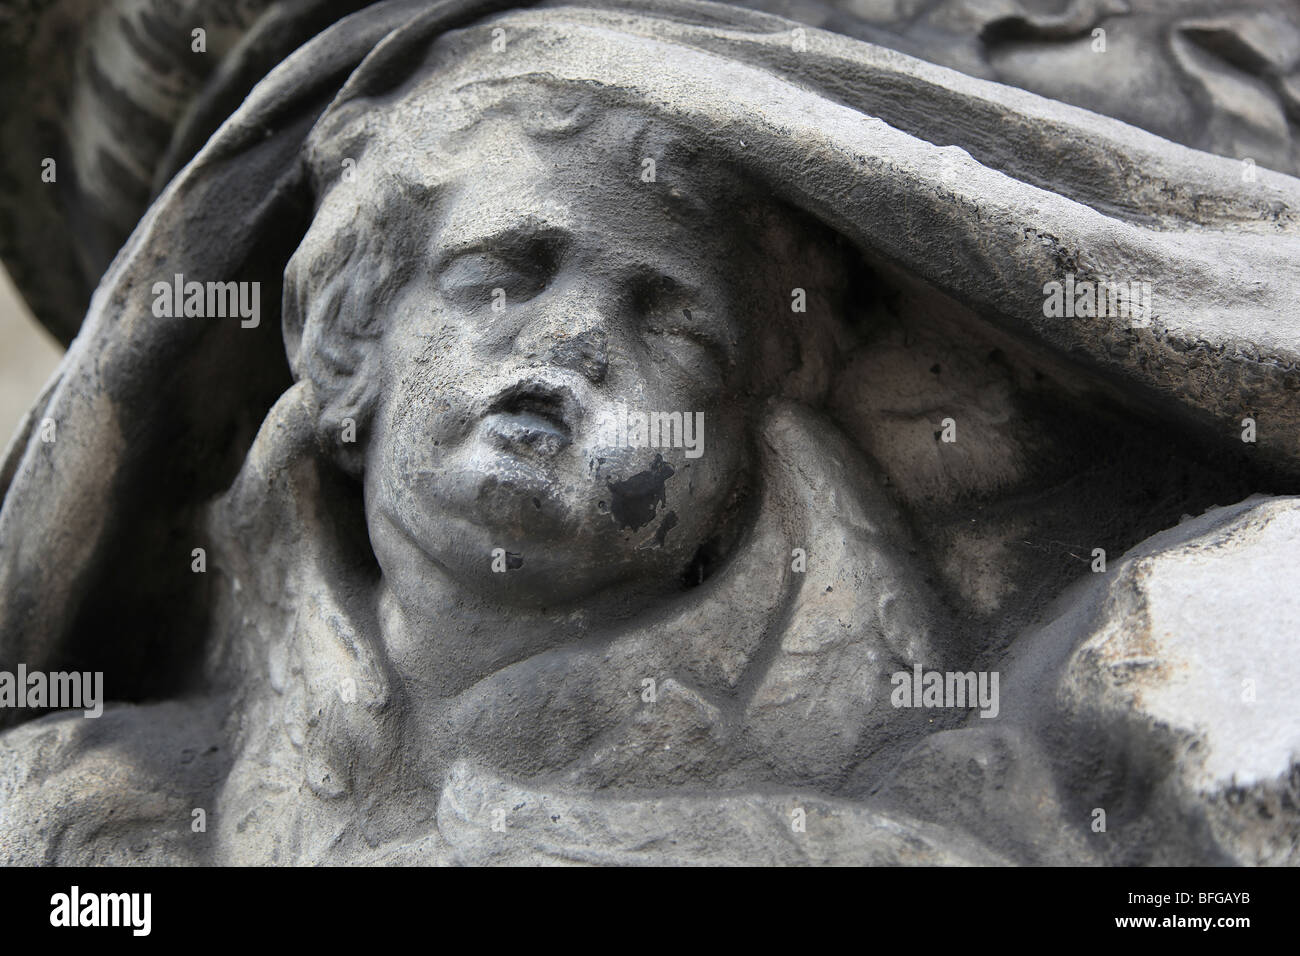 Cherub Statue High Resolution Stock Photography and Images - Alamy